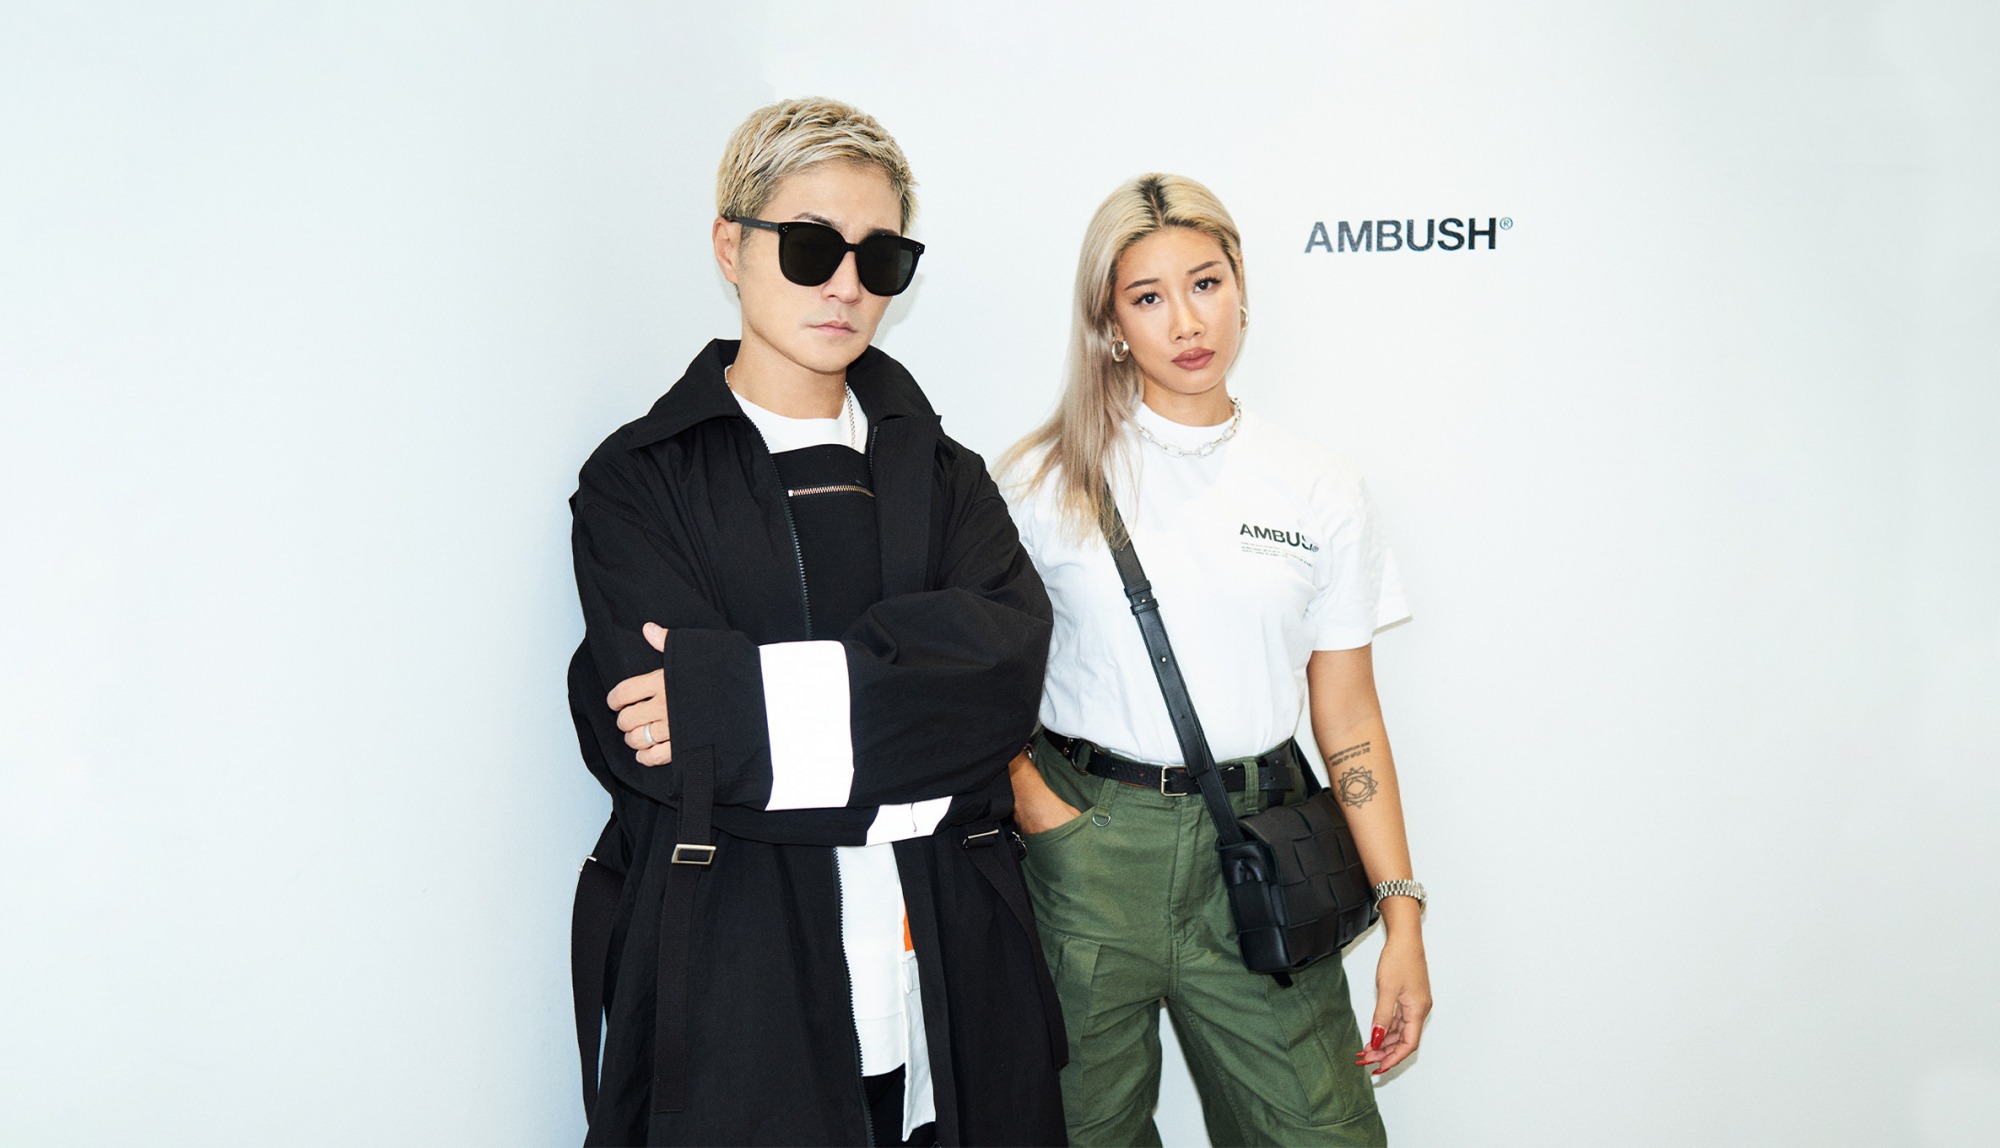  Ambush, the clothing firm that started out designing extravagant jewelry.